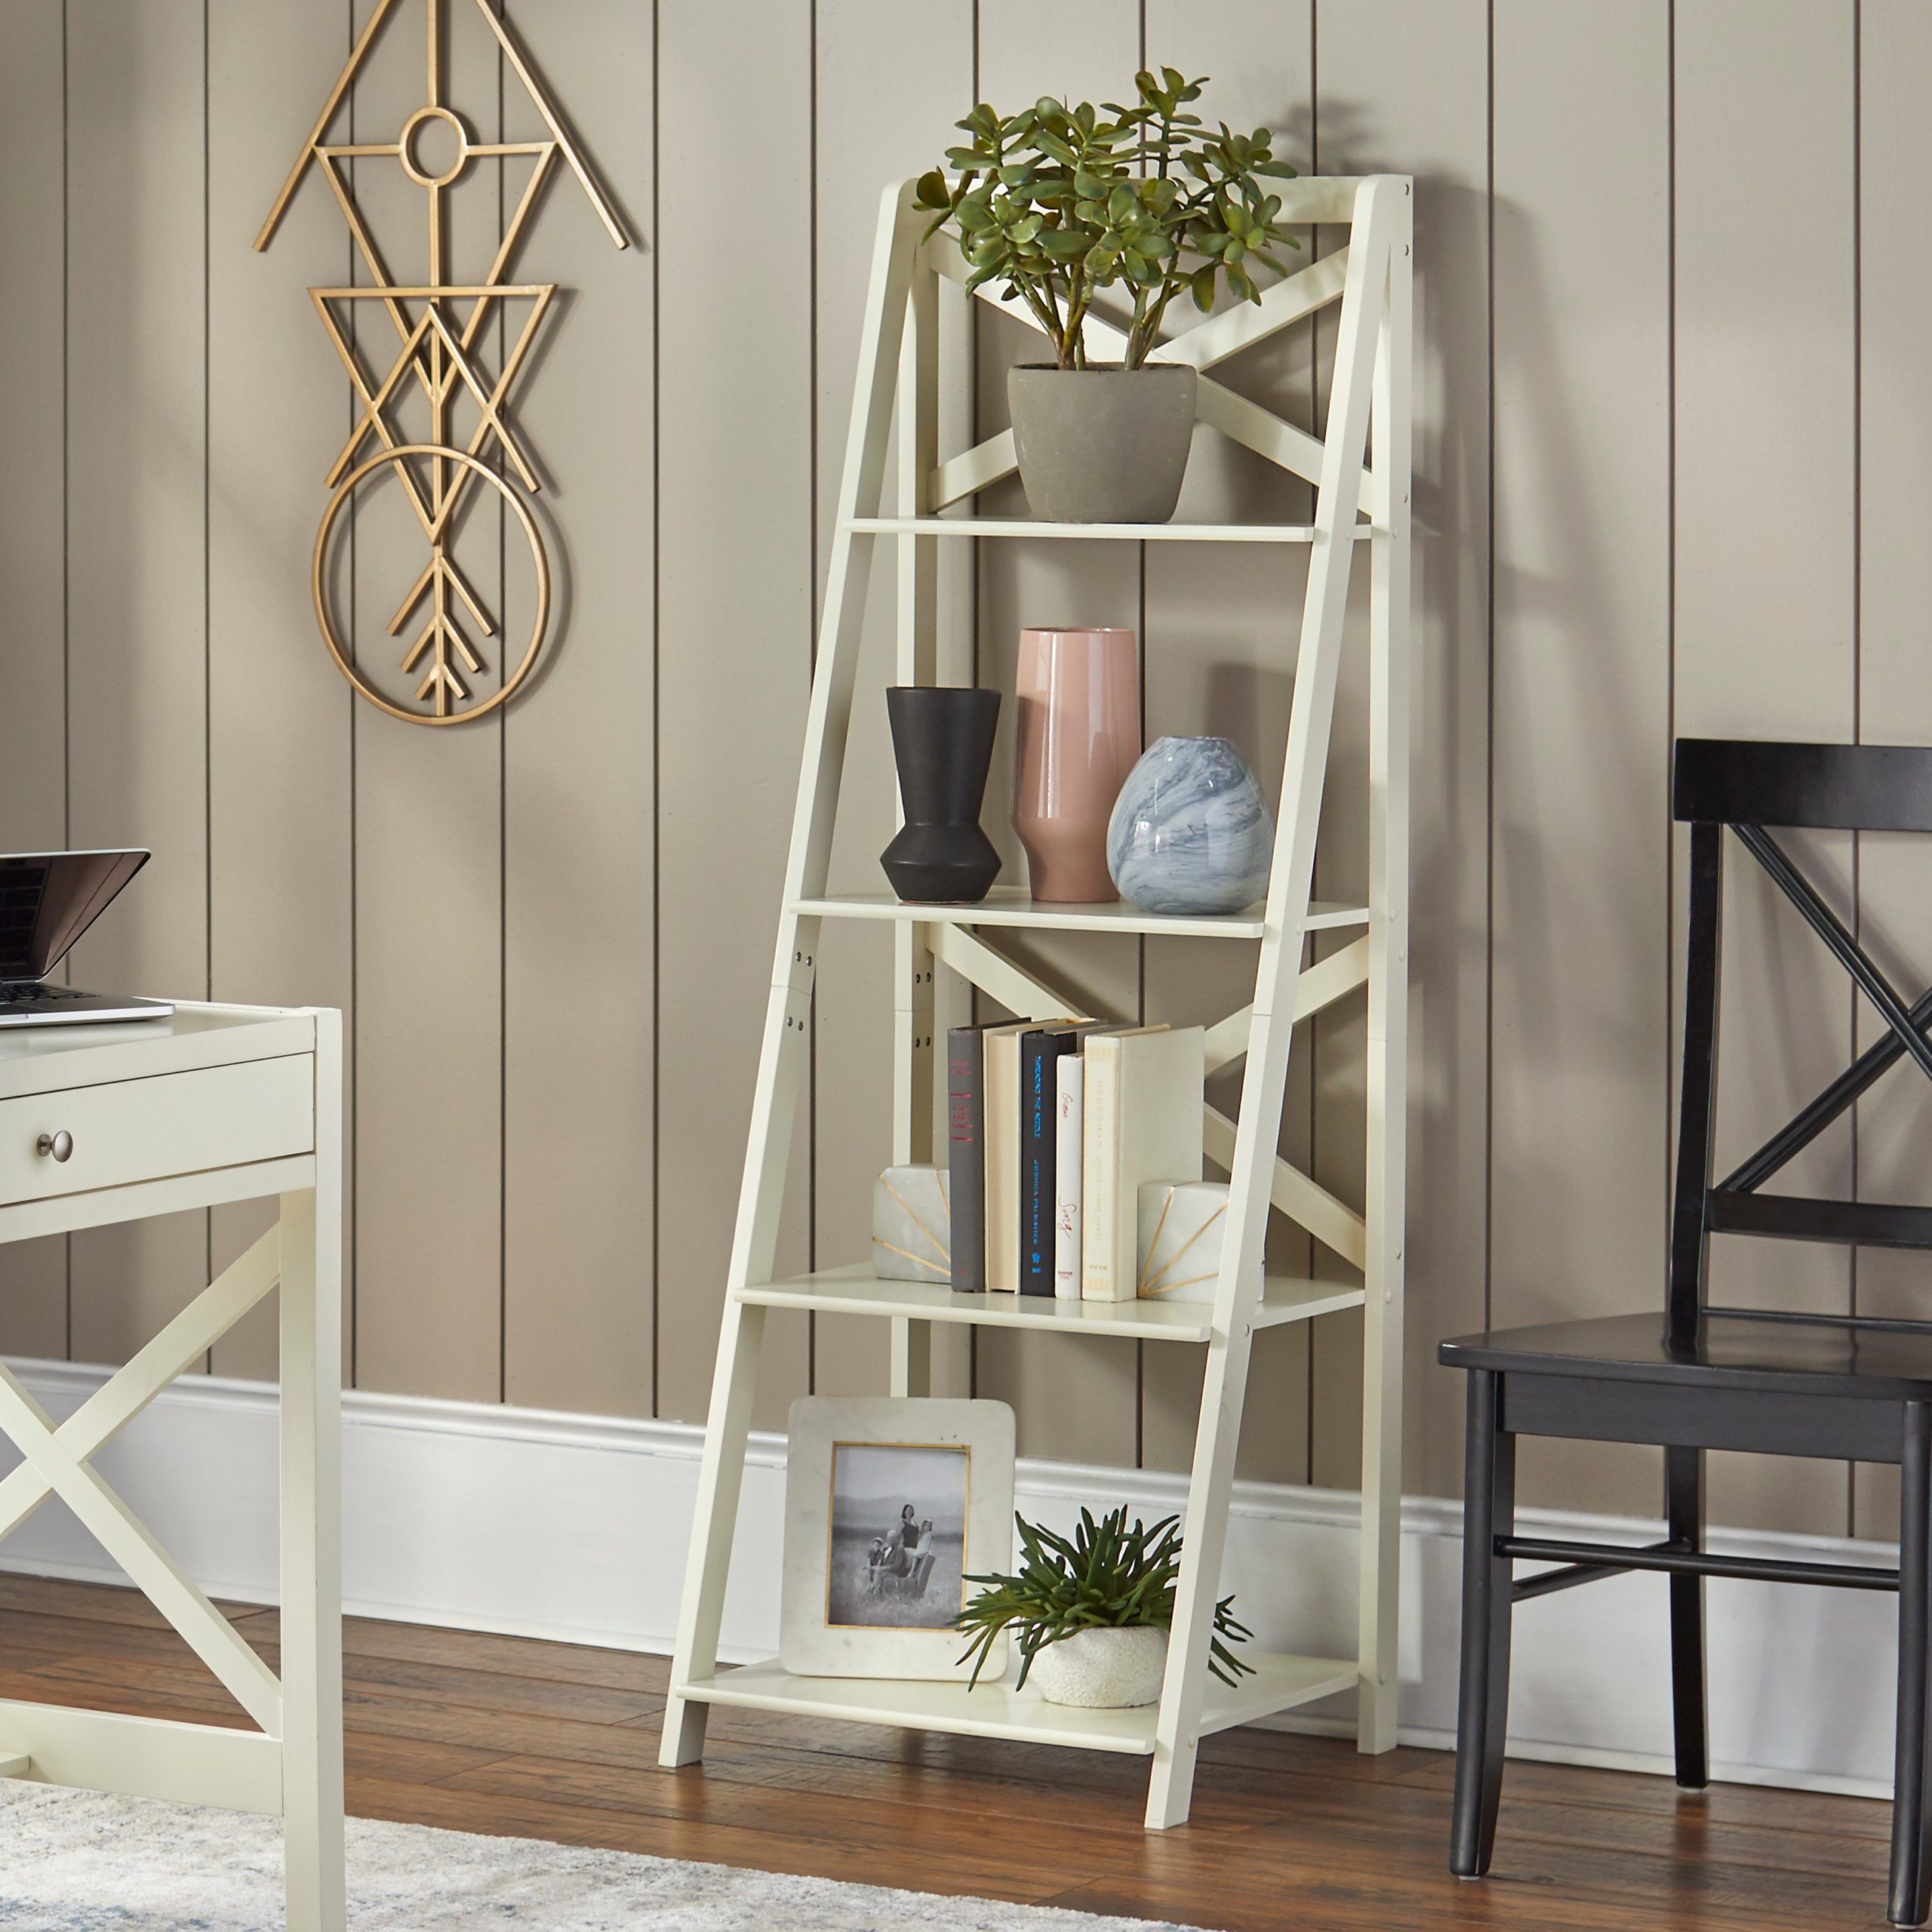 Simple Living Farmhouse 4 Tier Shelf – Overstock – 9283932 With Regard To Four Tier Bookcases (View 9 of 15)